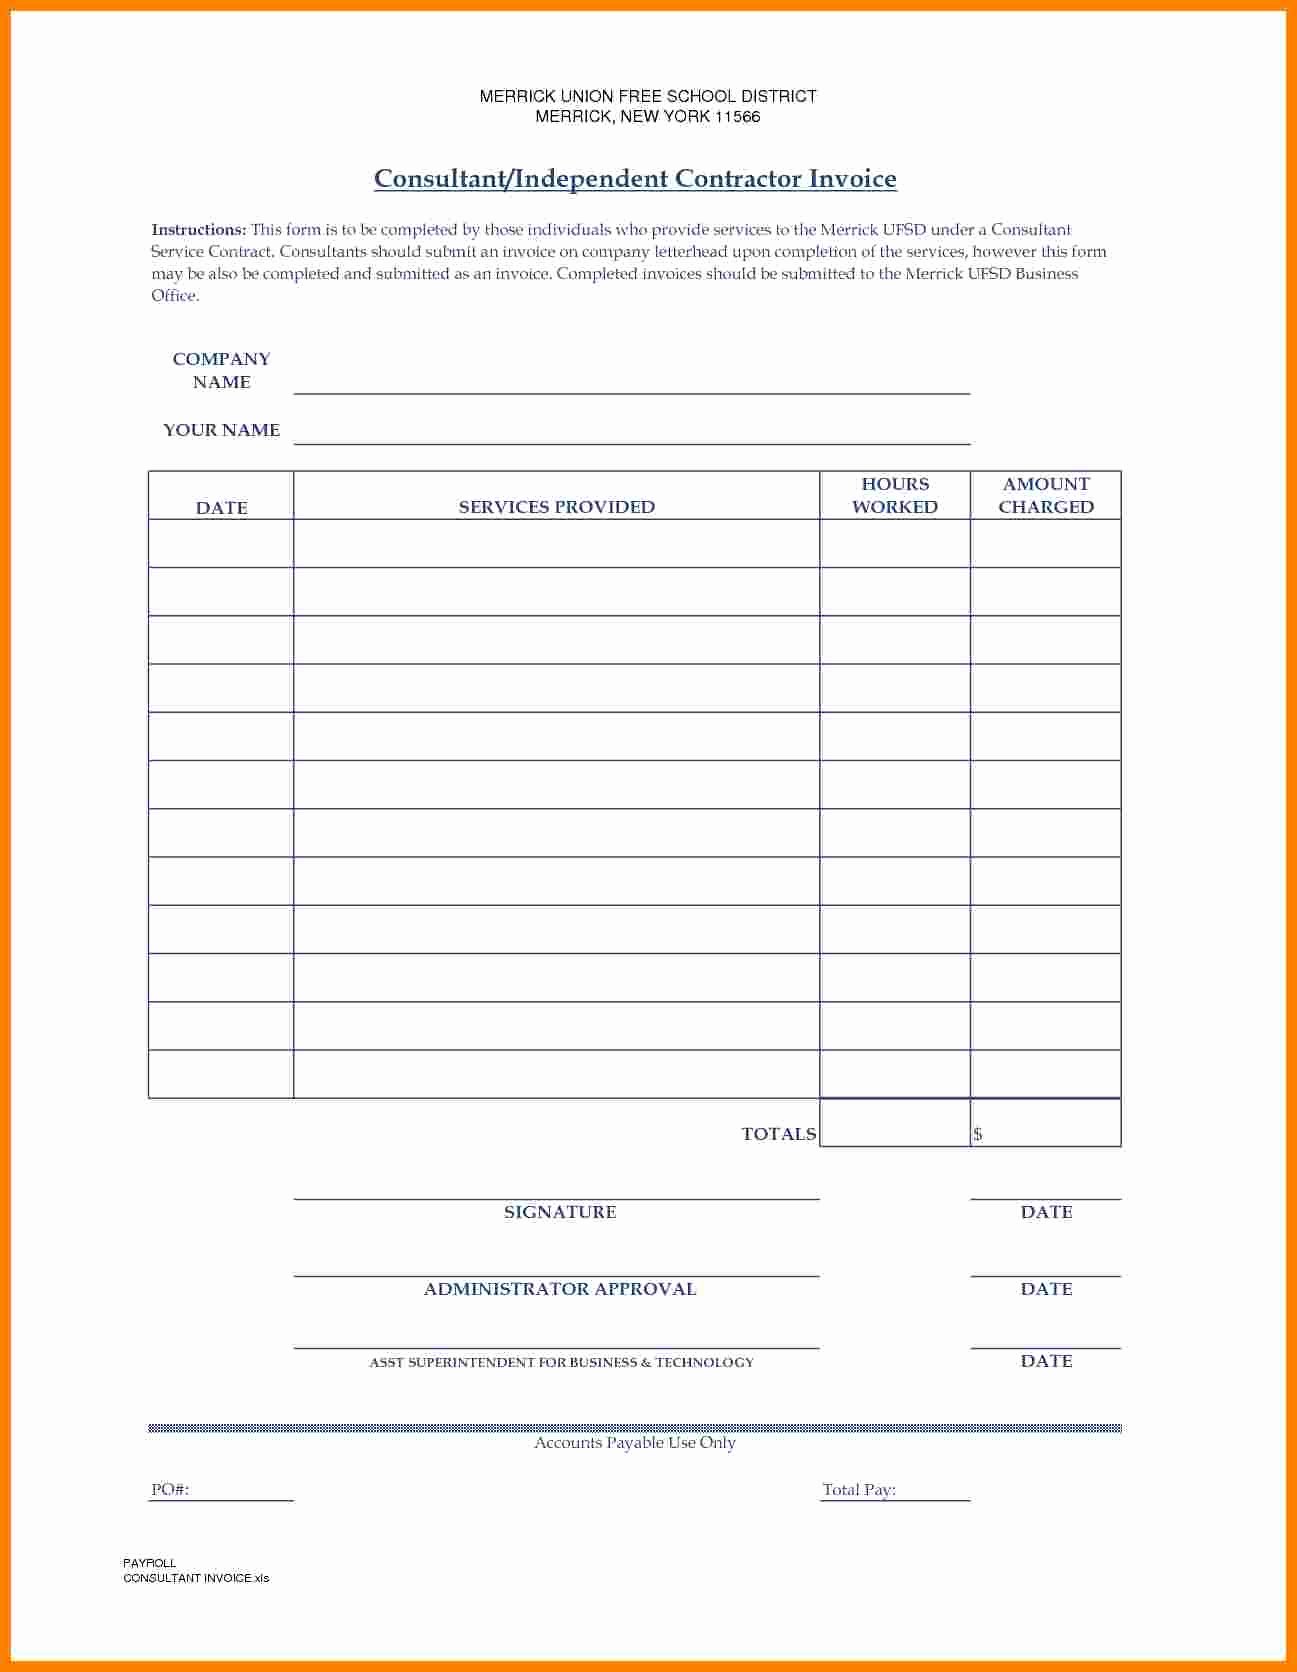 Independent Contractor Invoice Template Pdf Unique 7 Independent Contractor Invoice